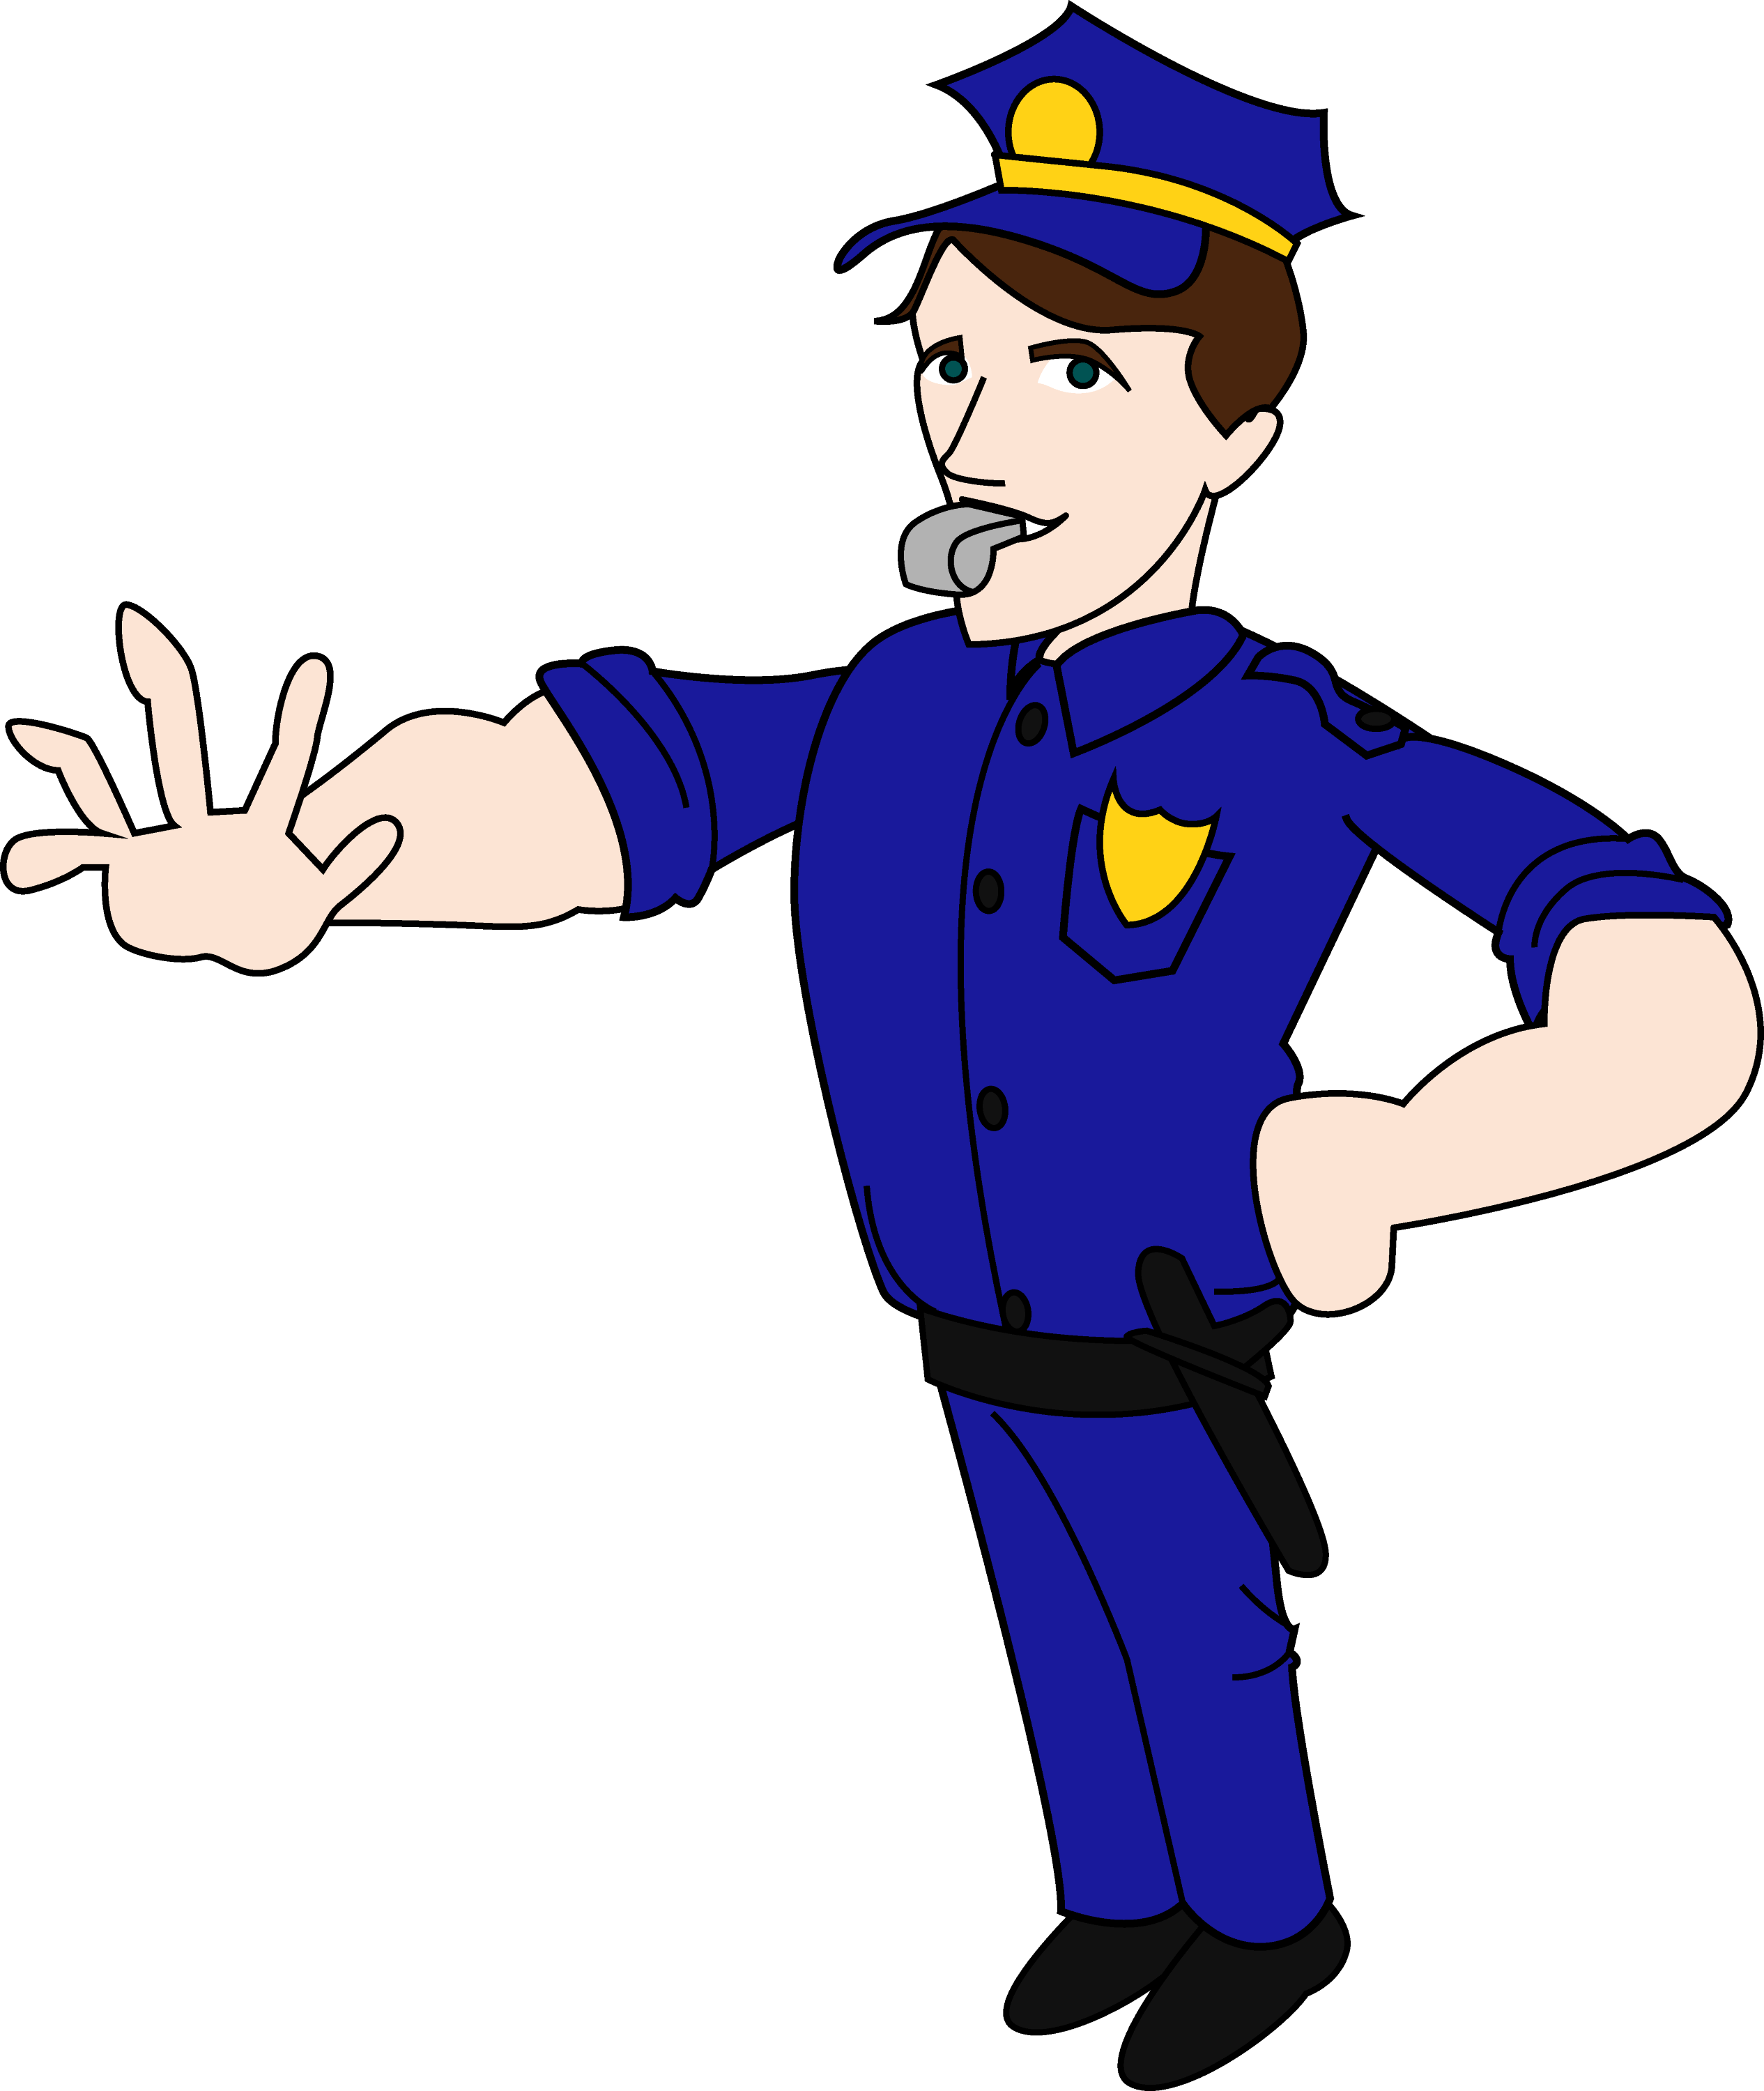 Clip Art Policeman Images Galleries With A Bite!